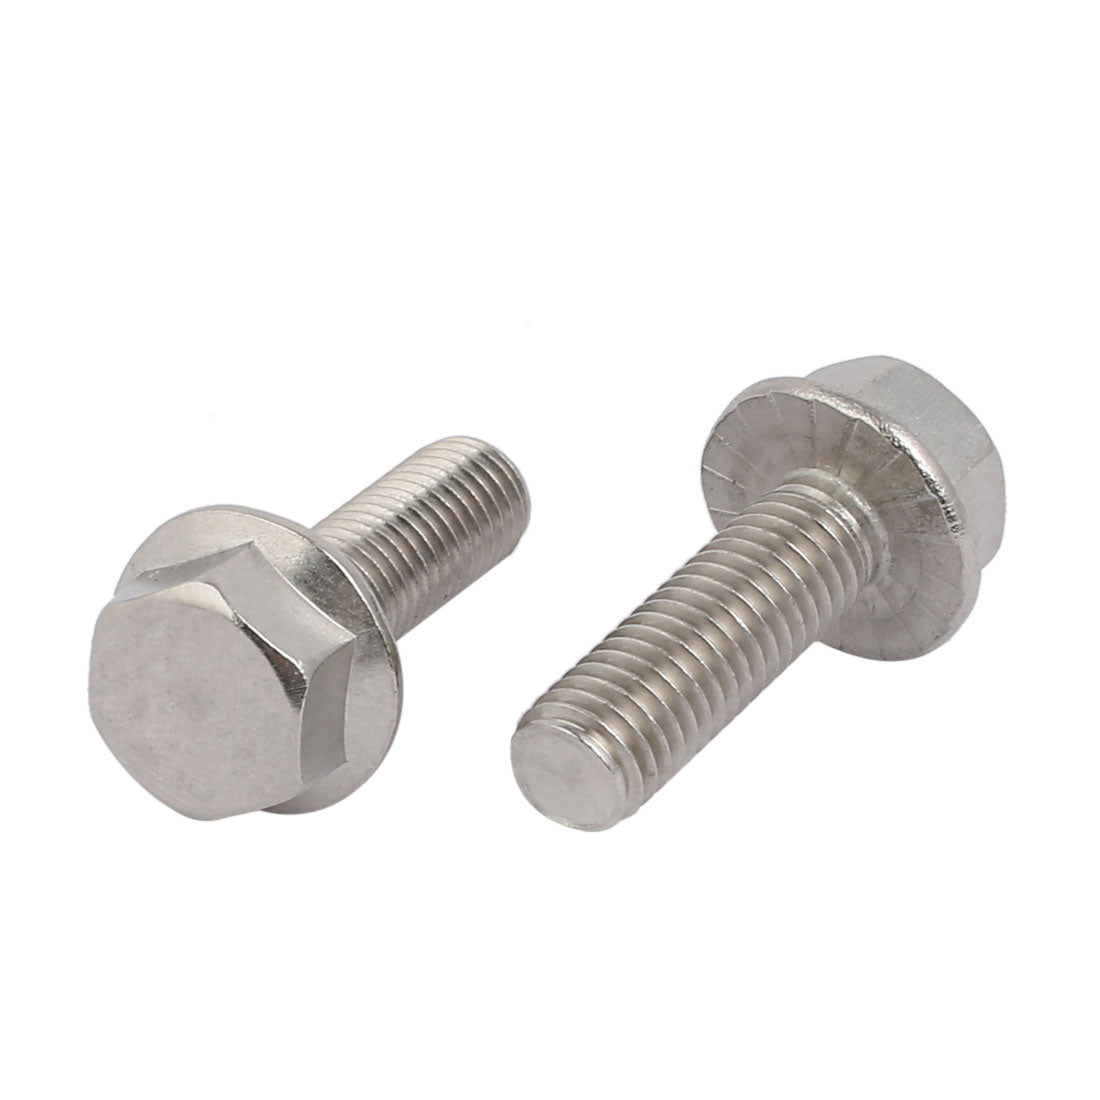 uxcell Uxcell M8x25mm Thread 304 Stainless Steel Hex Head Serrated Flange Screw Bolt 4pcs